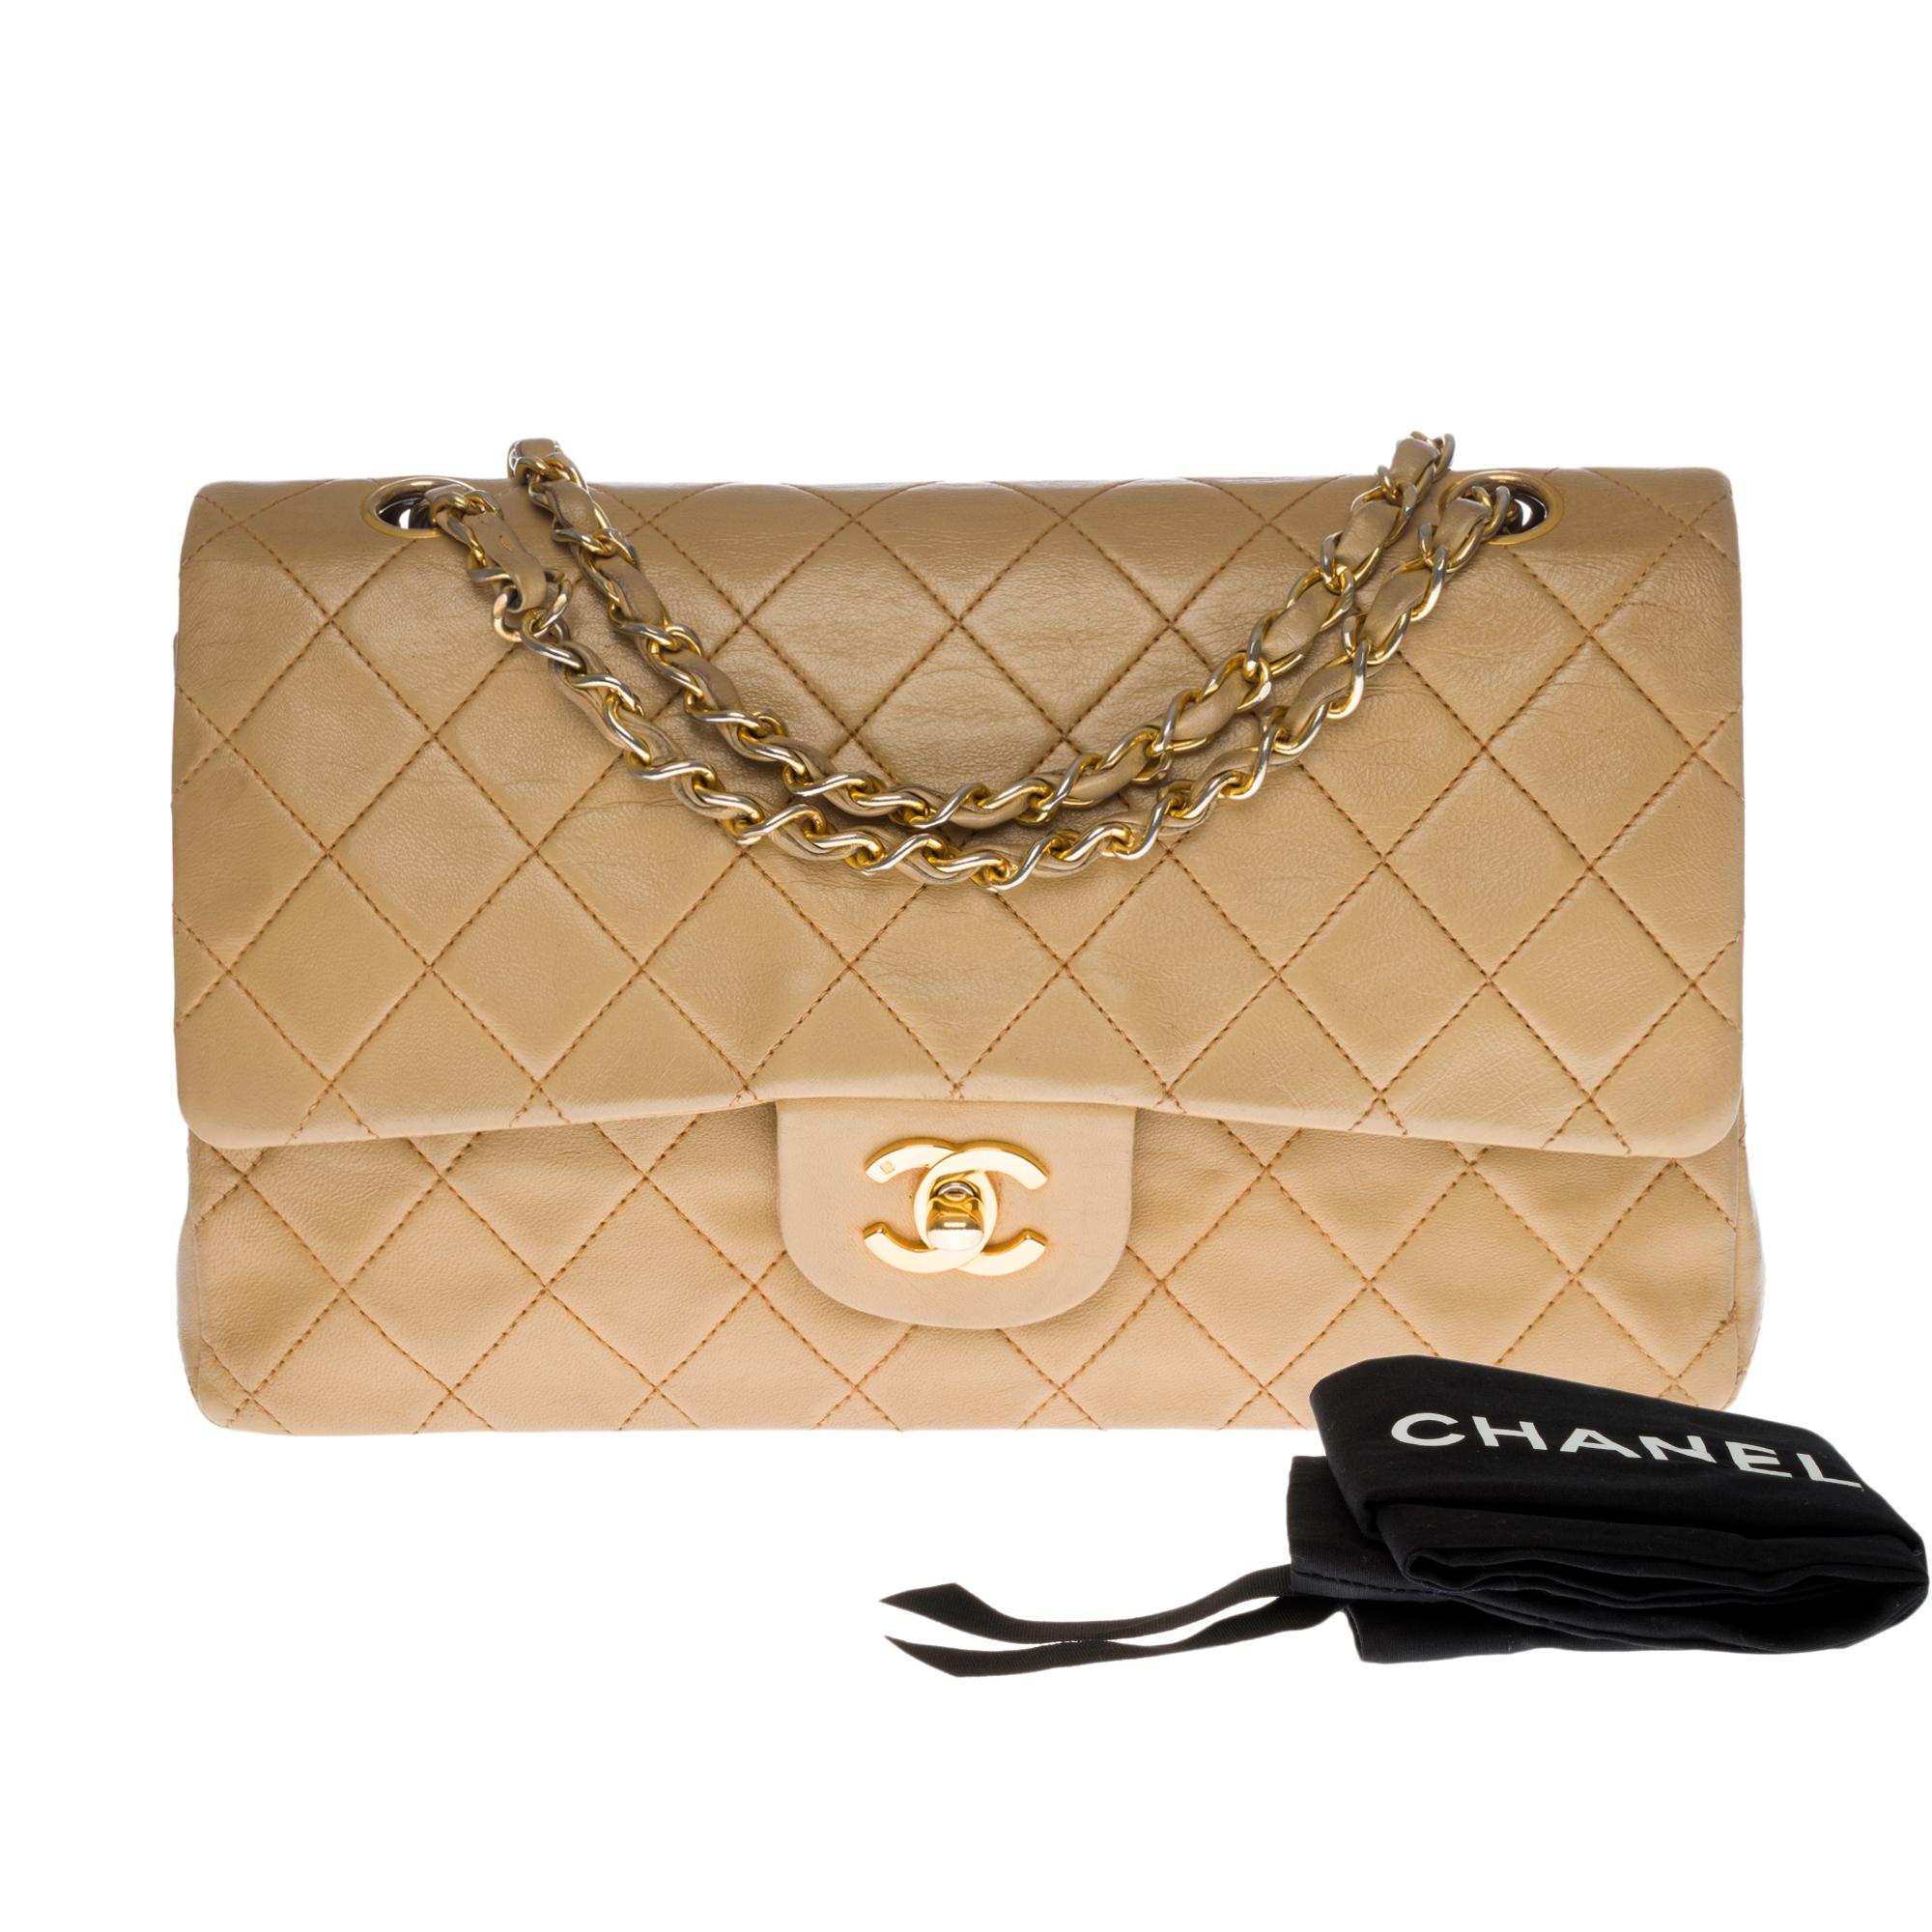 Chanel Timeless double flap Medium Shoulder bag in beige quilted leather, GHW 6